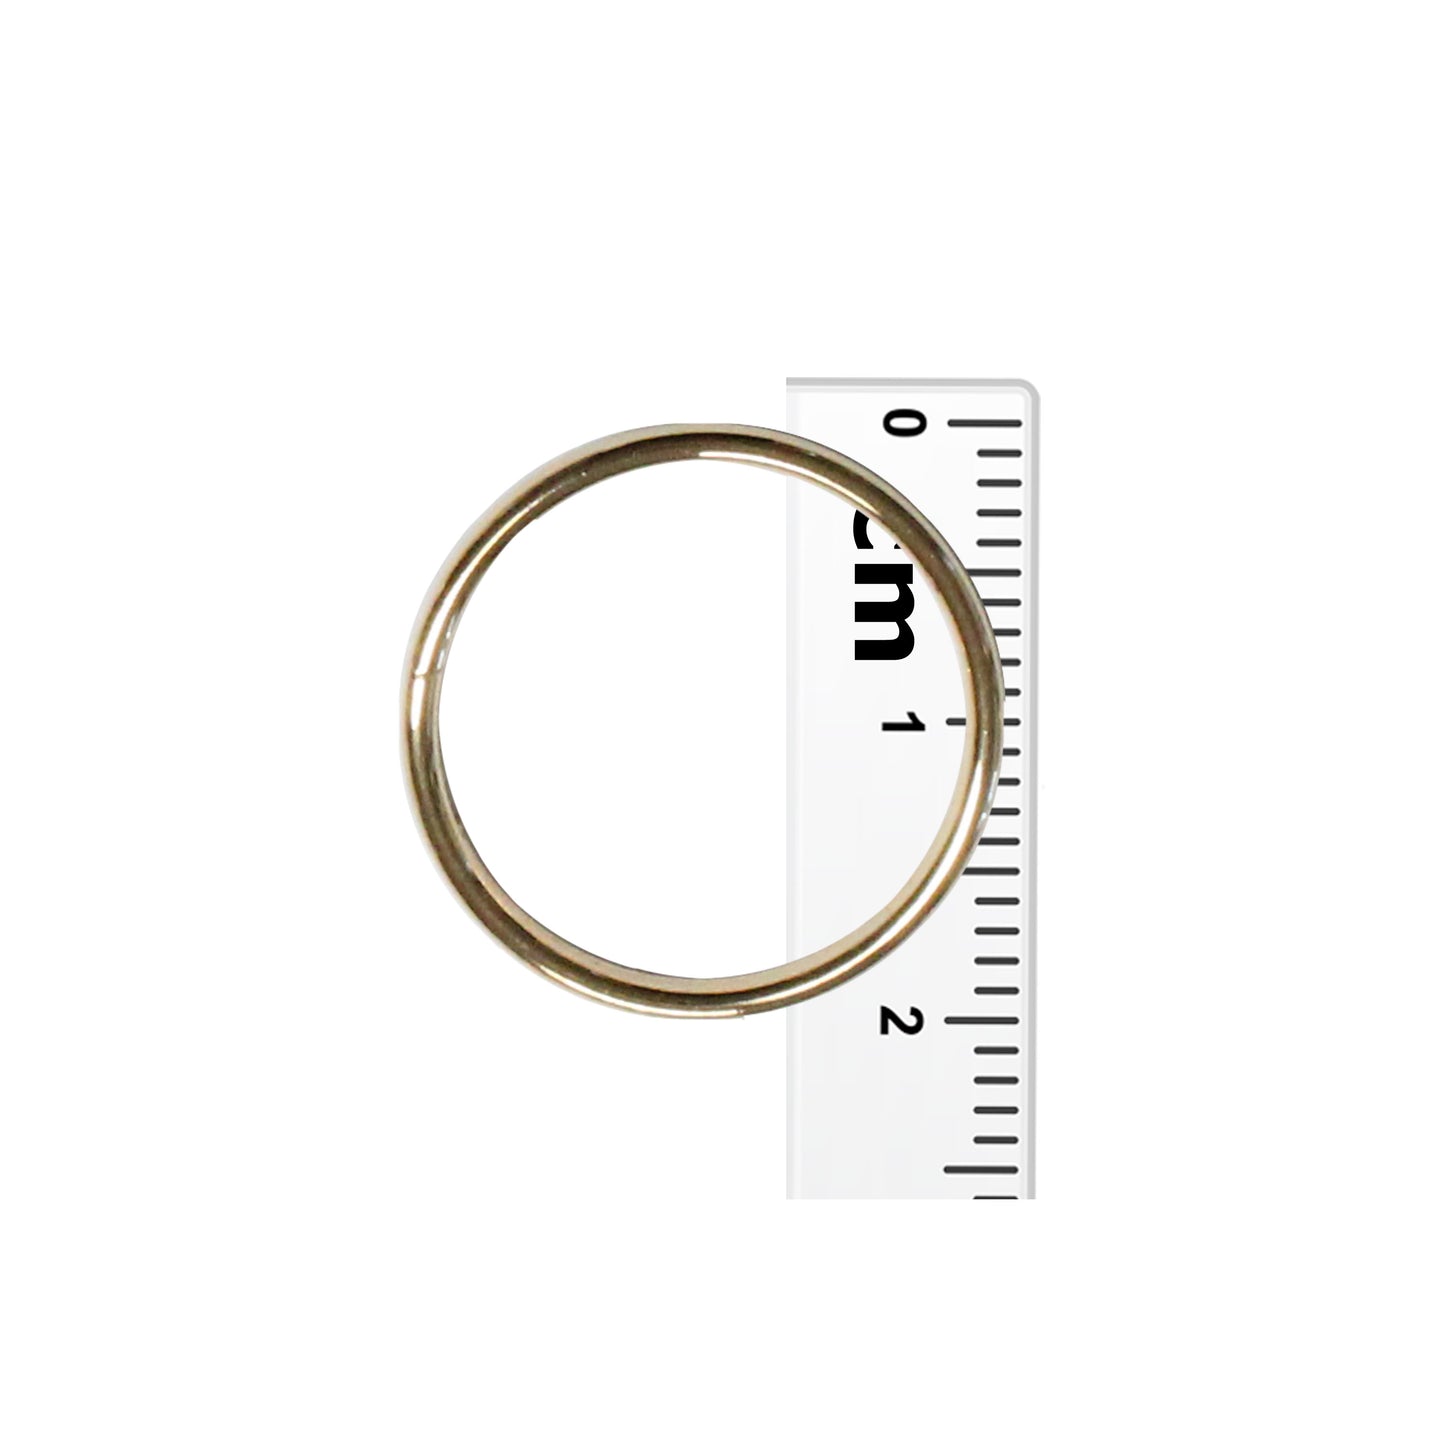 20mm Bright Gold Split Ring / 10 Pack / for key rings or secure charms or tags